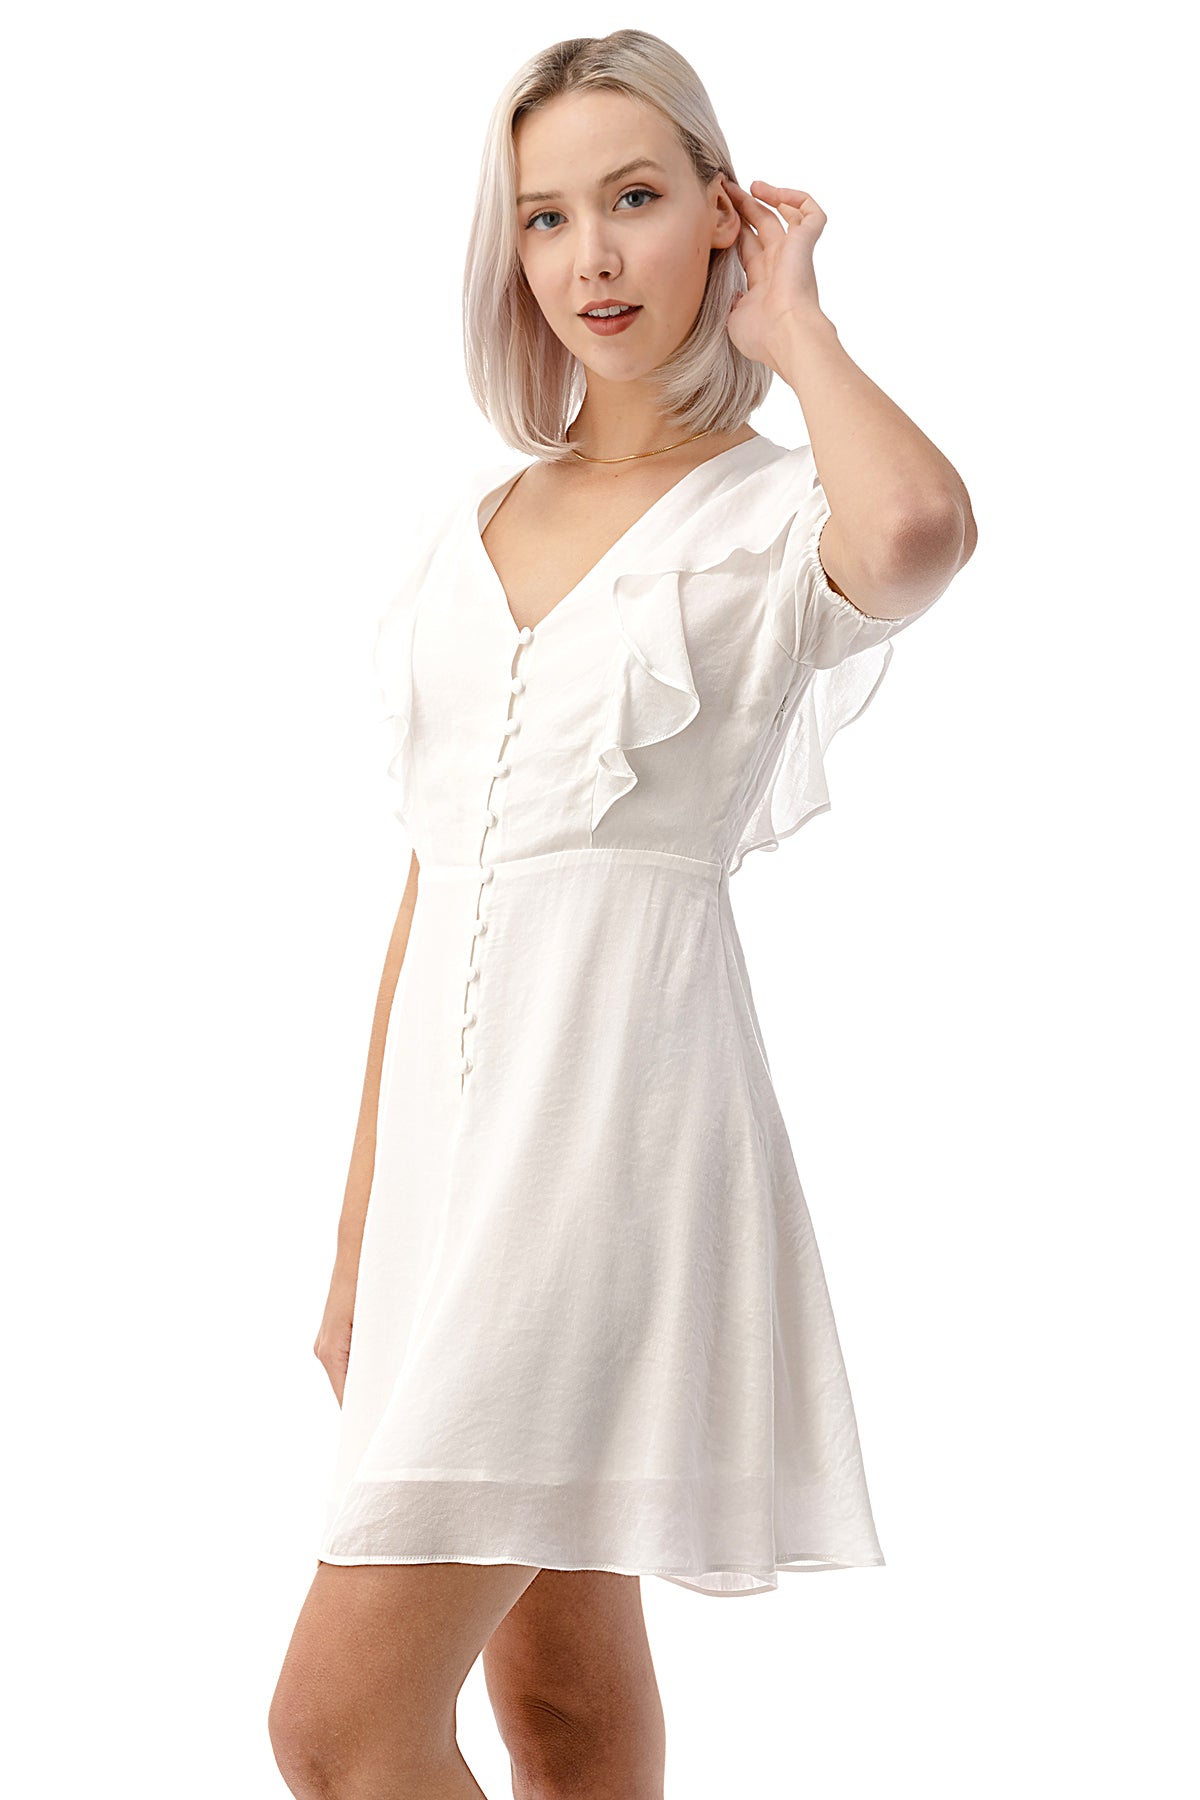 Button Down Short Above-Knee Sleeve Party Ruffled A-Line V-Neck Dress EDGY Land –